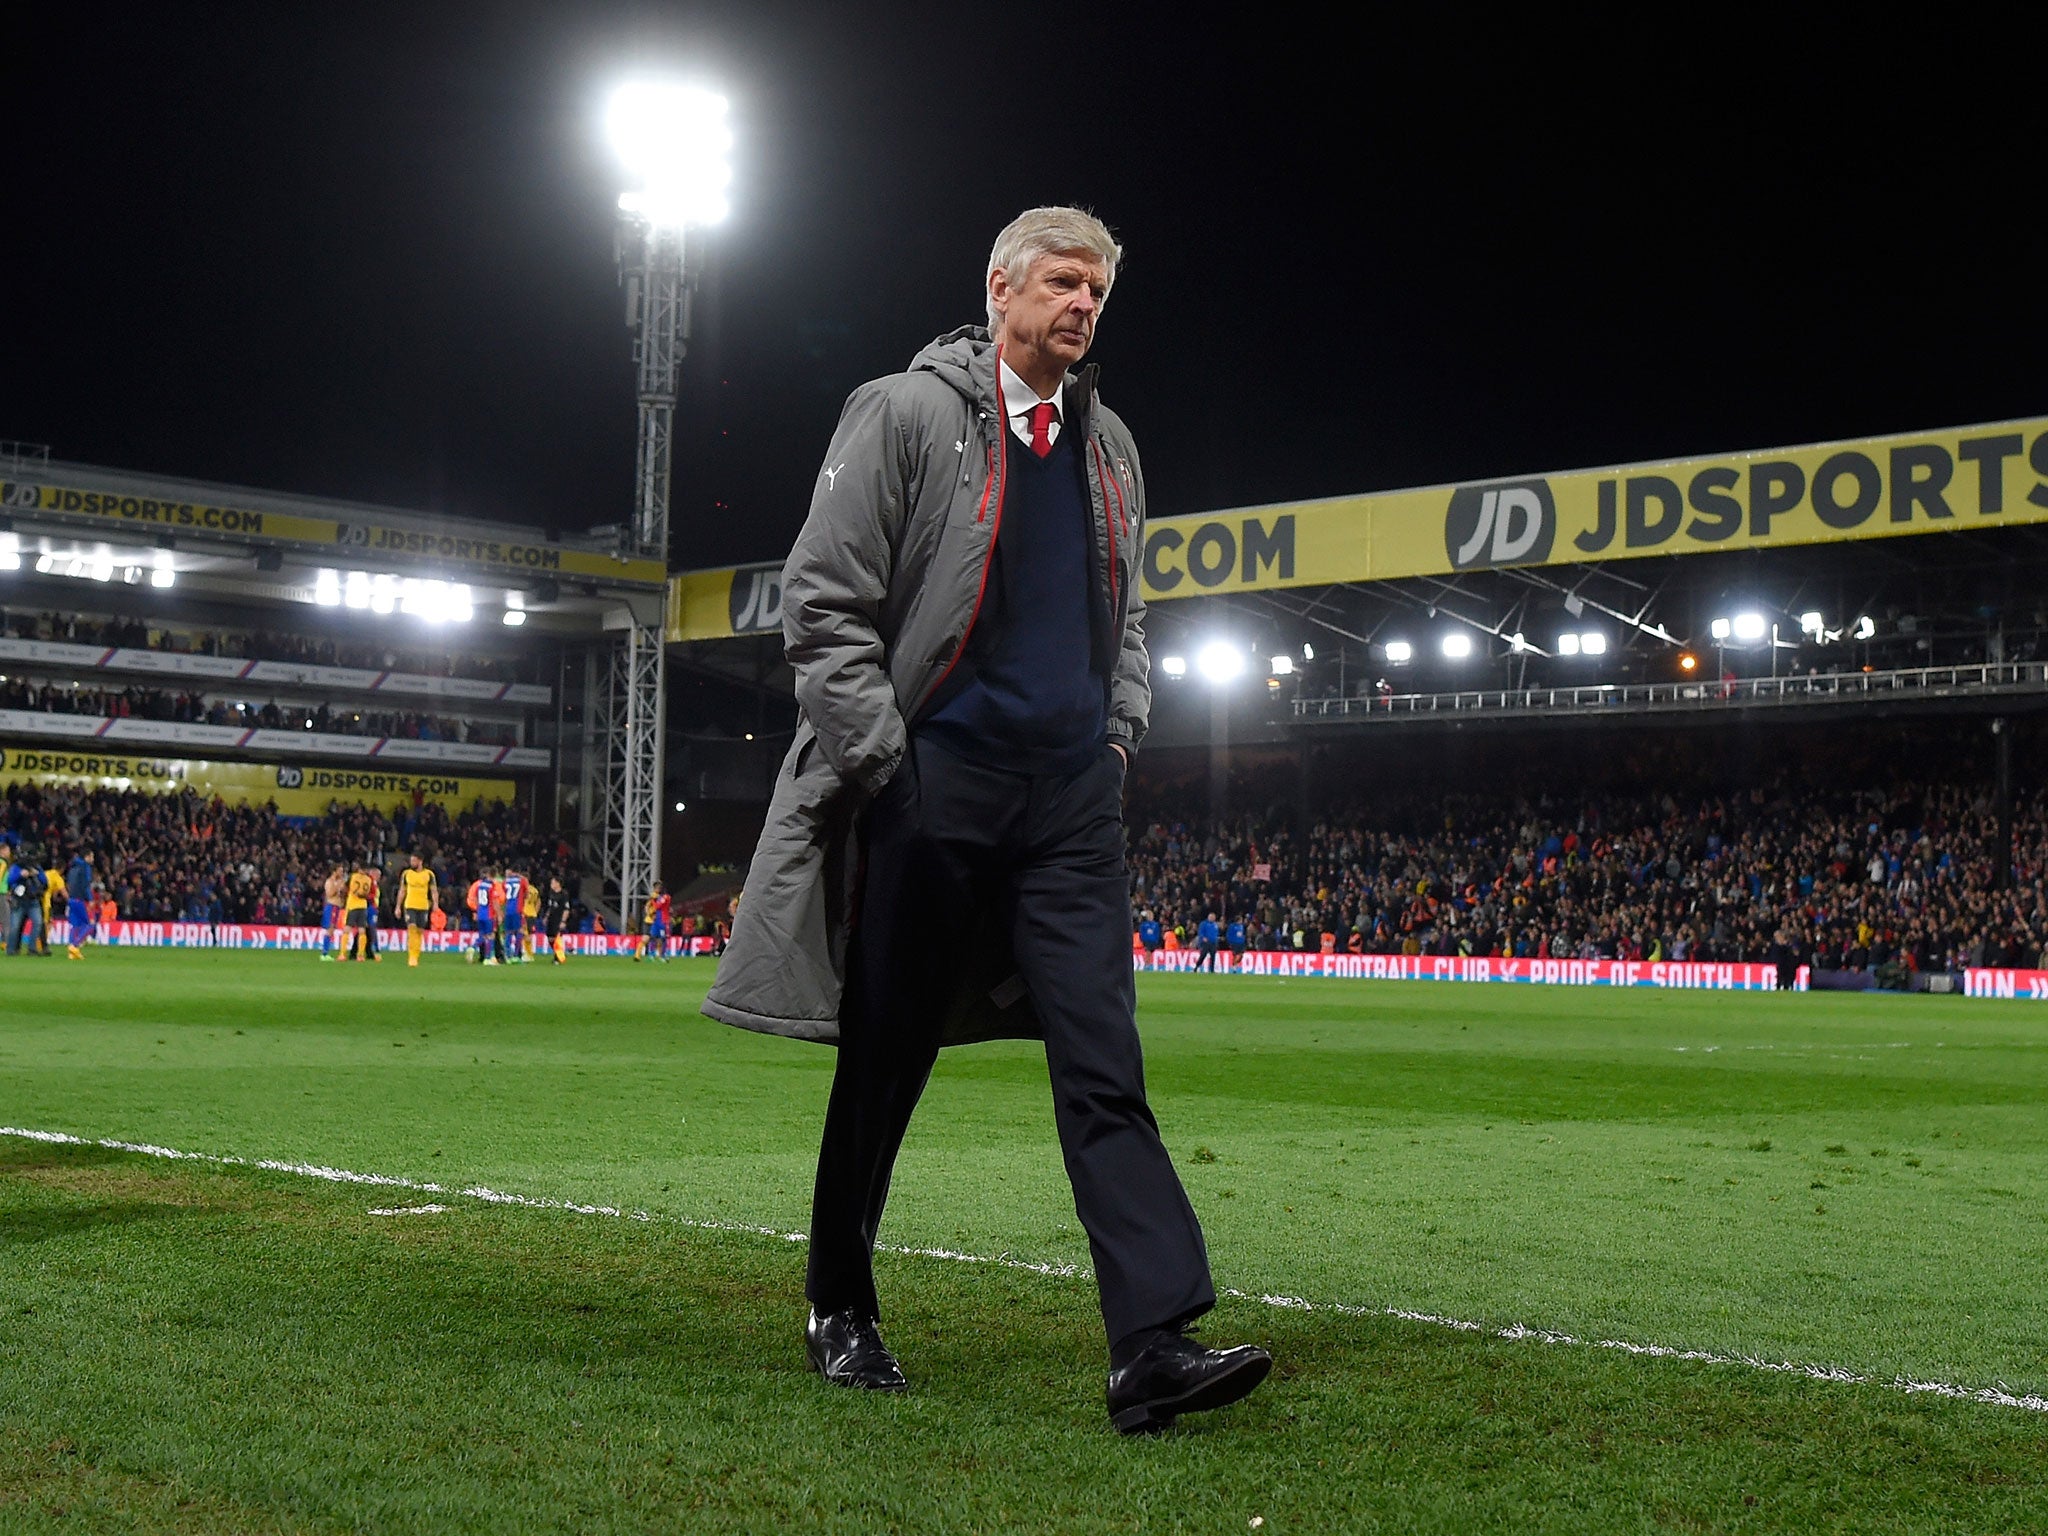 Wenger slumped to another defeat as Arsenal's disappointing run of results continue